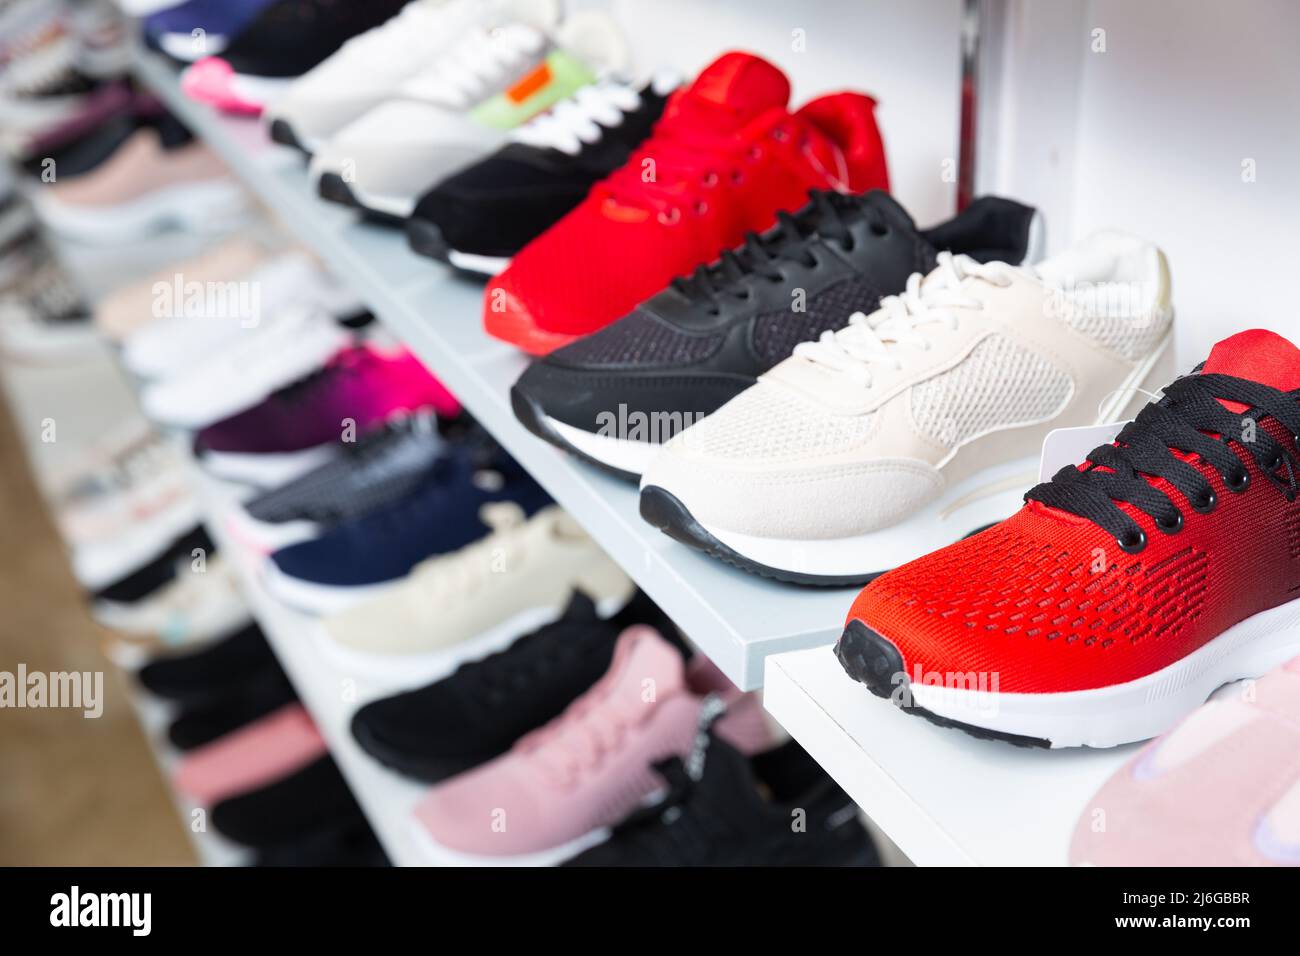 Shelves with sport shoes in shoes shop Stock Photo - Alamy